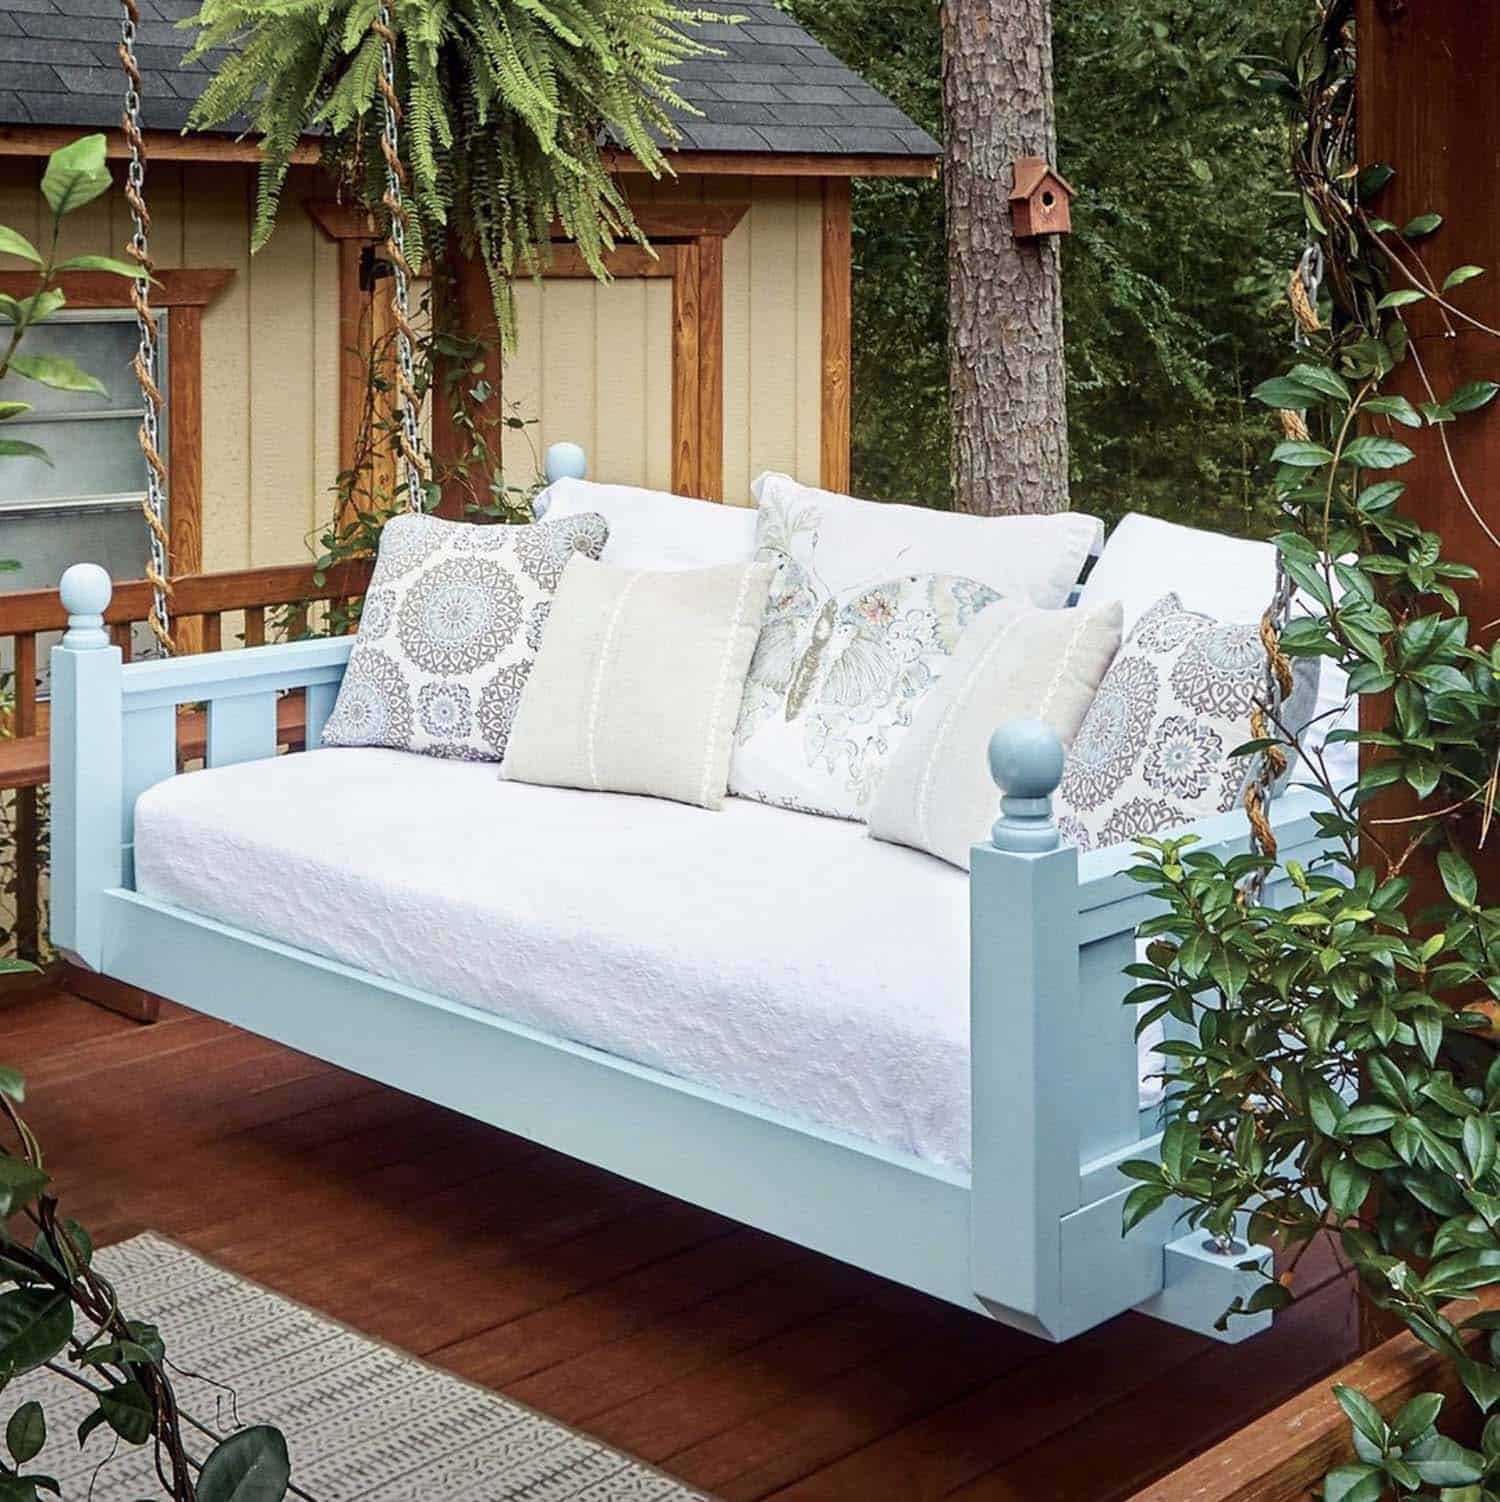 inviting porch swing painted in a light blue